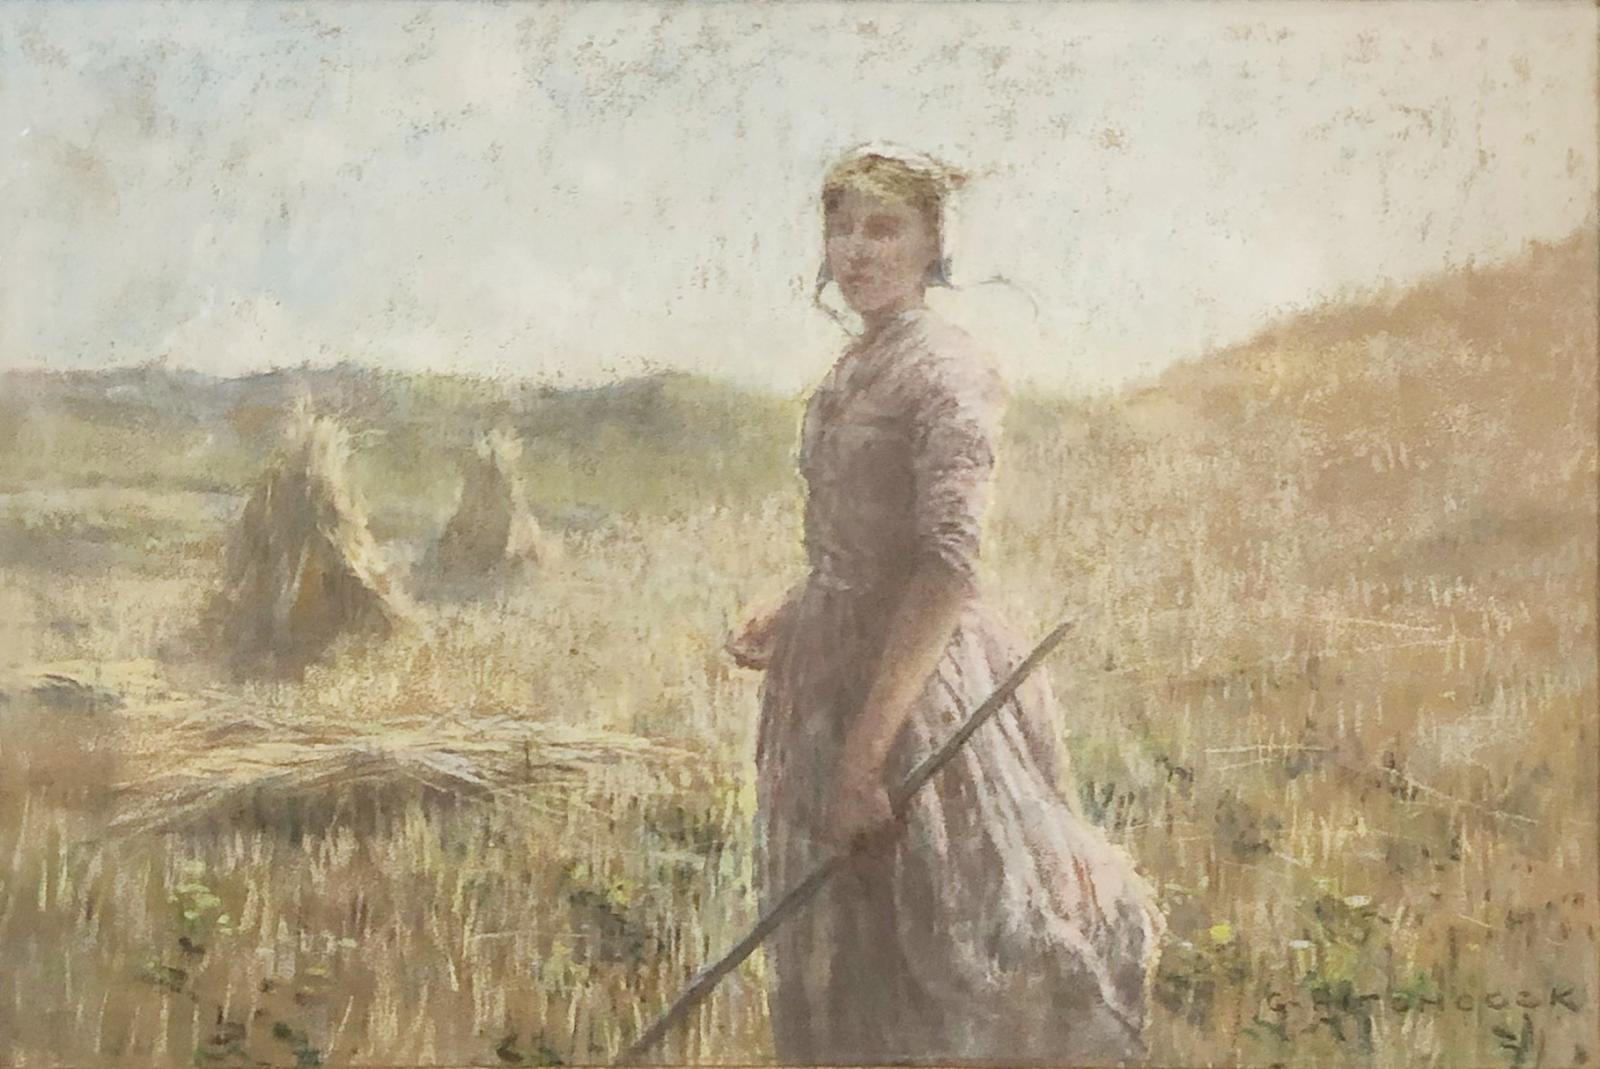 A rural landscape, a wheat field, the focus is on a single figure of a young girl